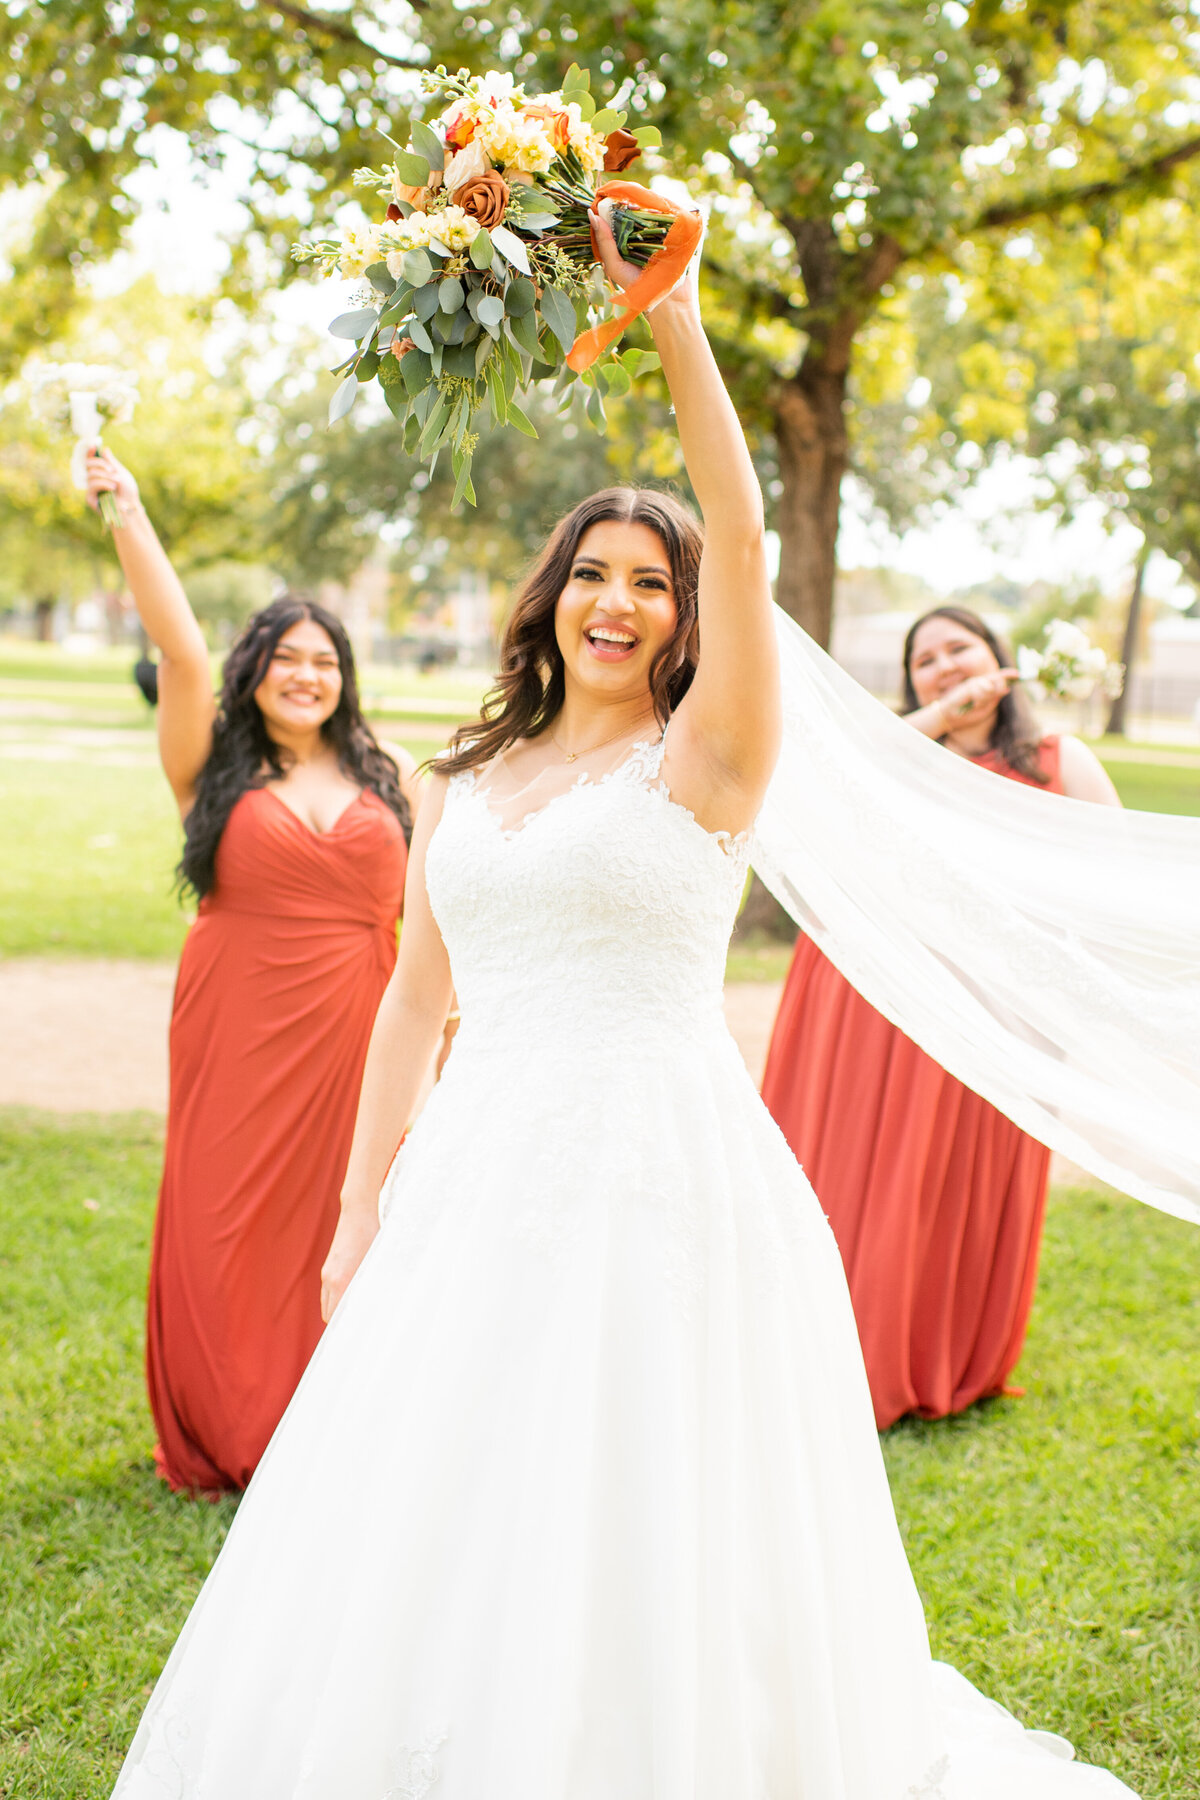 Celebrate the pure joy and camaraderie of a bride and her girls in Bellaire, Texas, as they make memories and cherish the moments leading up to the big day